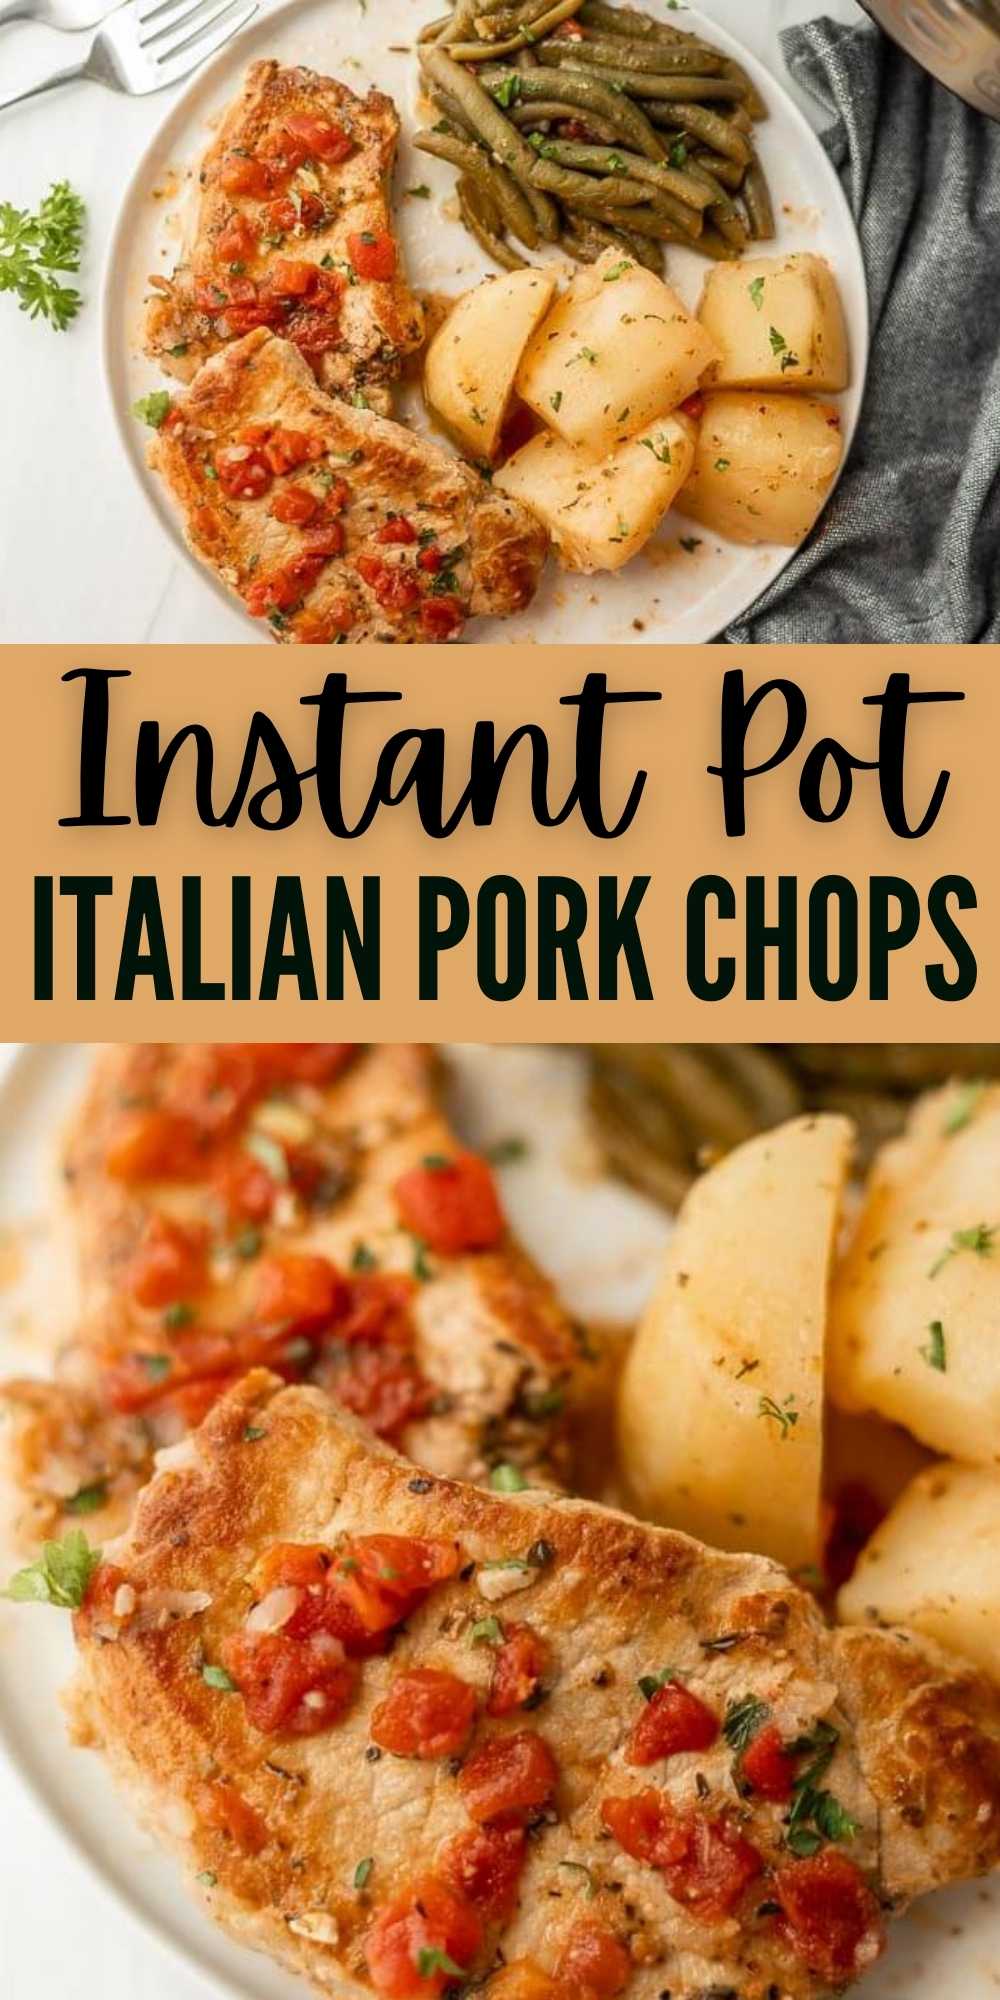 Instant Pot Italian Pork Chops Recipe makes dinner time a breeze. Everything you need for a tasty meal is in the instant pot.  Instant Pot Pork Chops are easy to make and delicious too! #eatingonadime #instantpotrecipes #porkrecipes #porkchoprecipes #pressurecookerrecipes 
